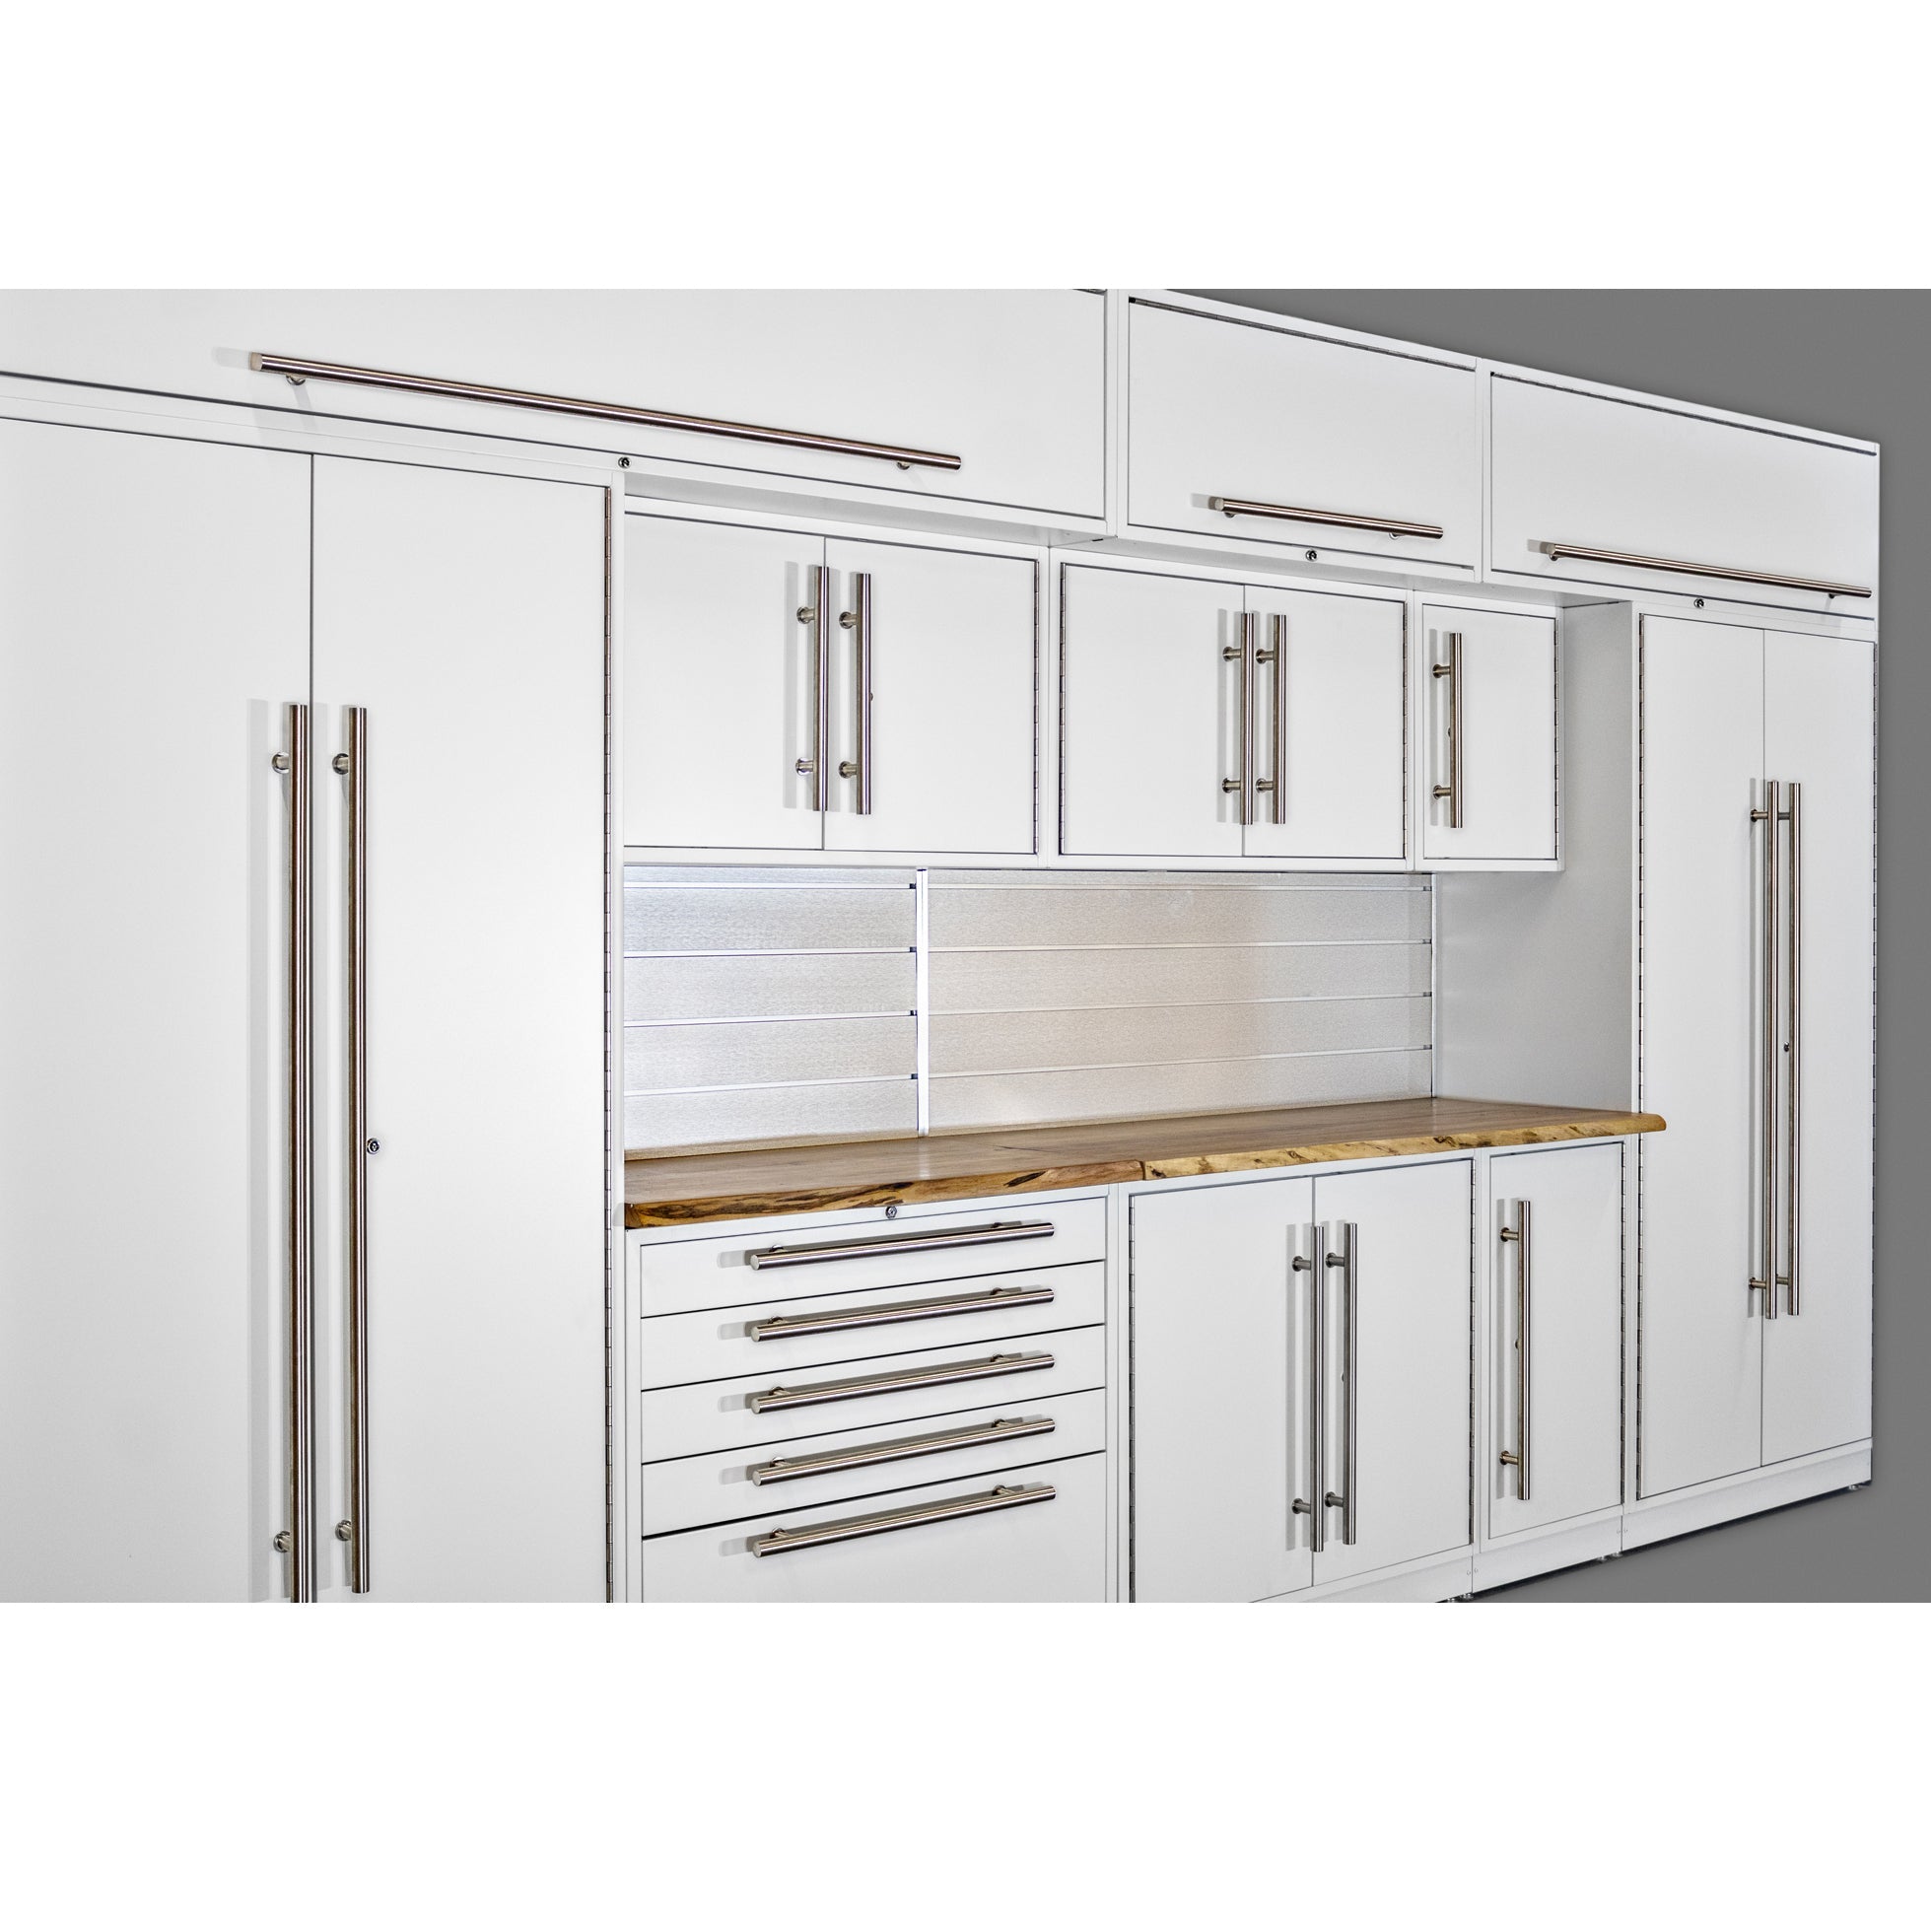 LUX Cabinets – 10 ft set – MAX